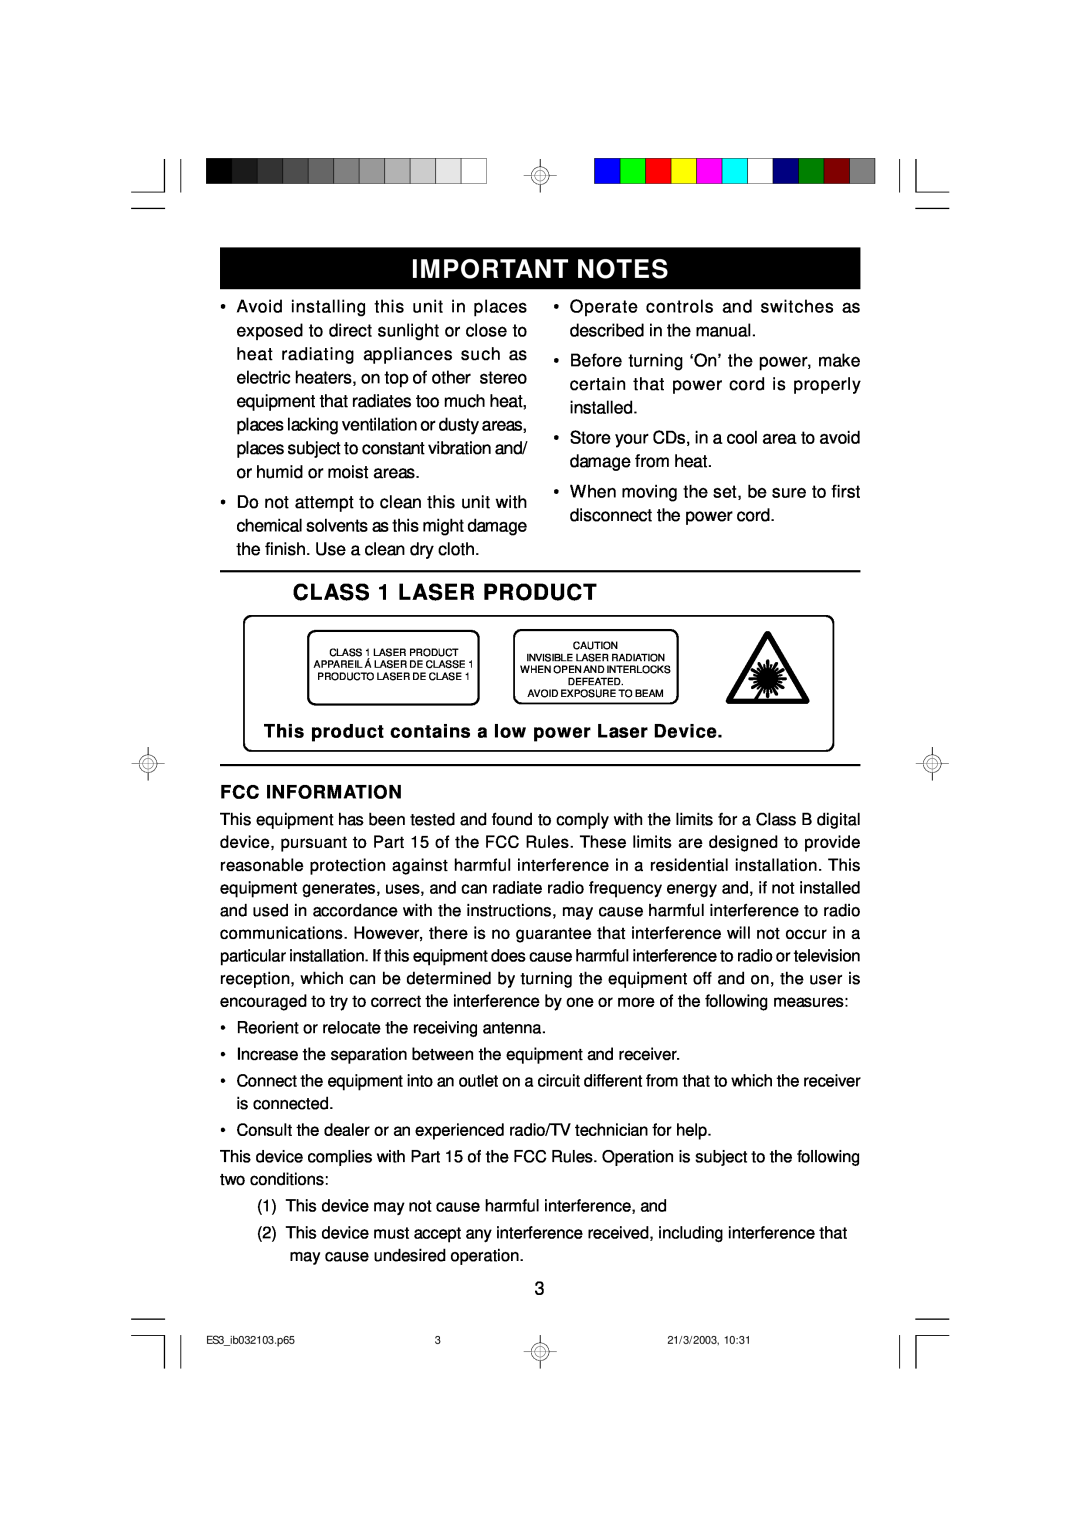 Emerson ES3 owner manual Important Notes, CLASS 1 LASER PRODUCT 